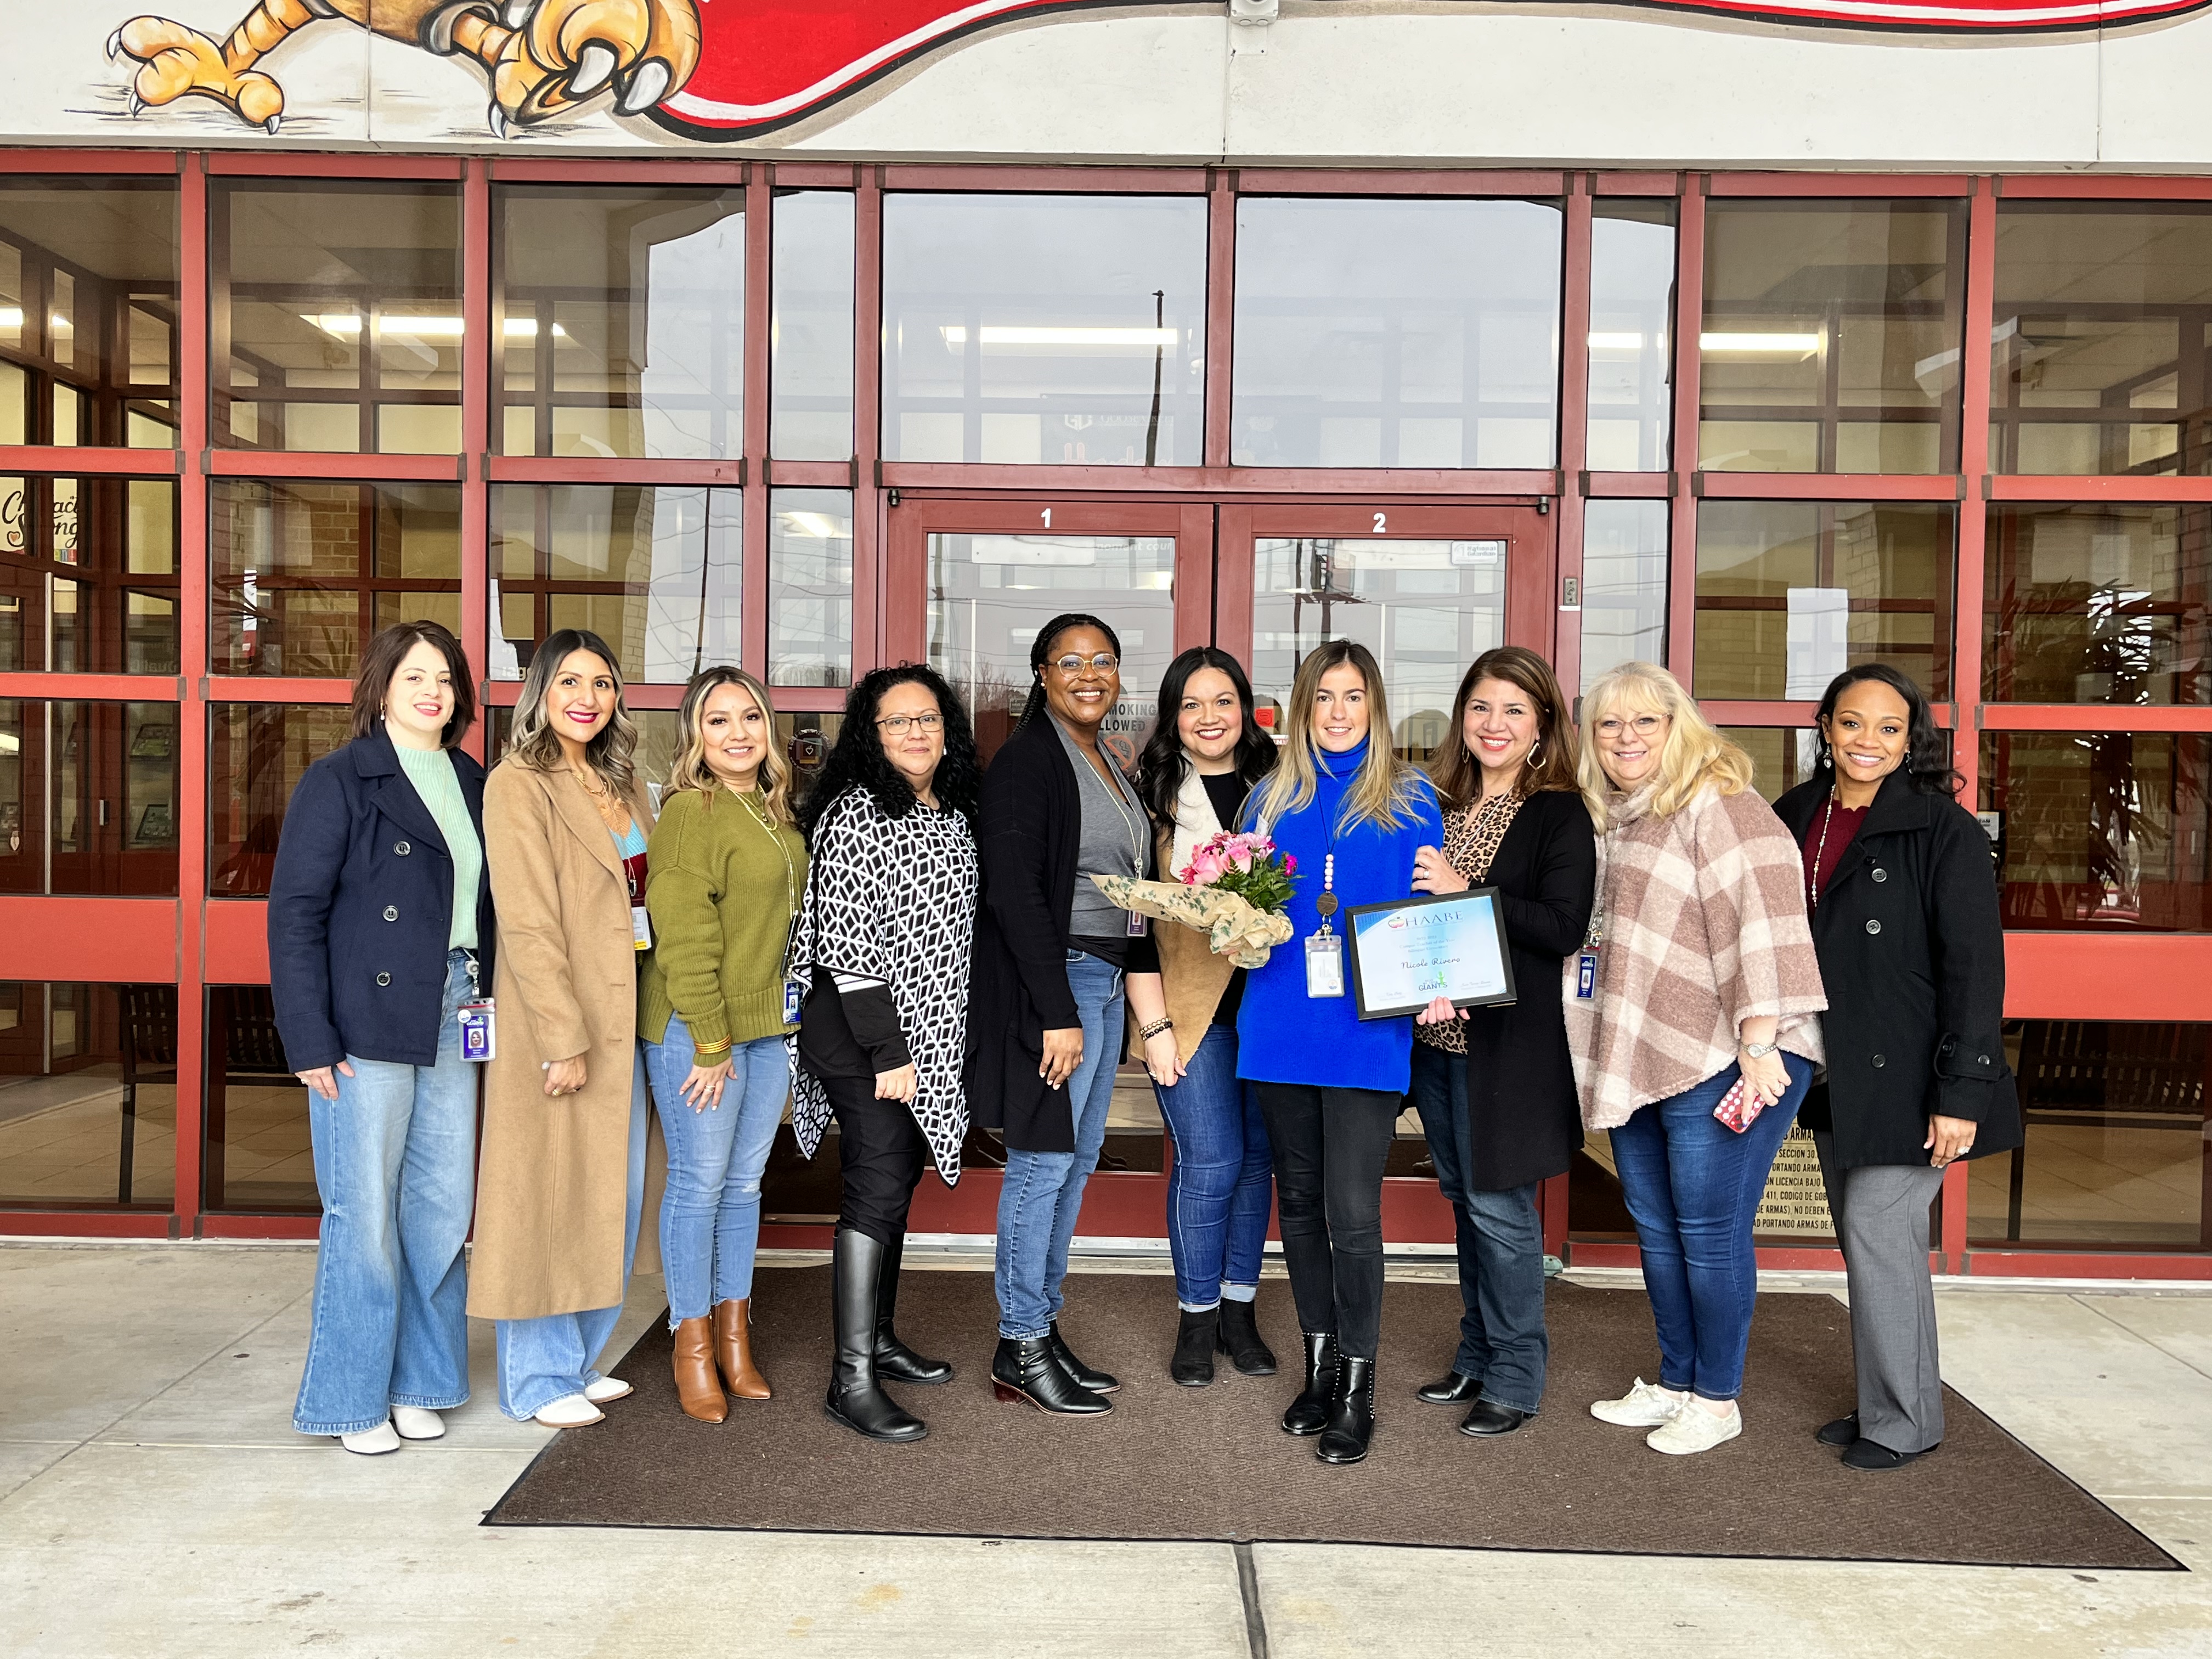 harlem elementary bilingual teacher of the year poses in front of the school with admin staff